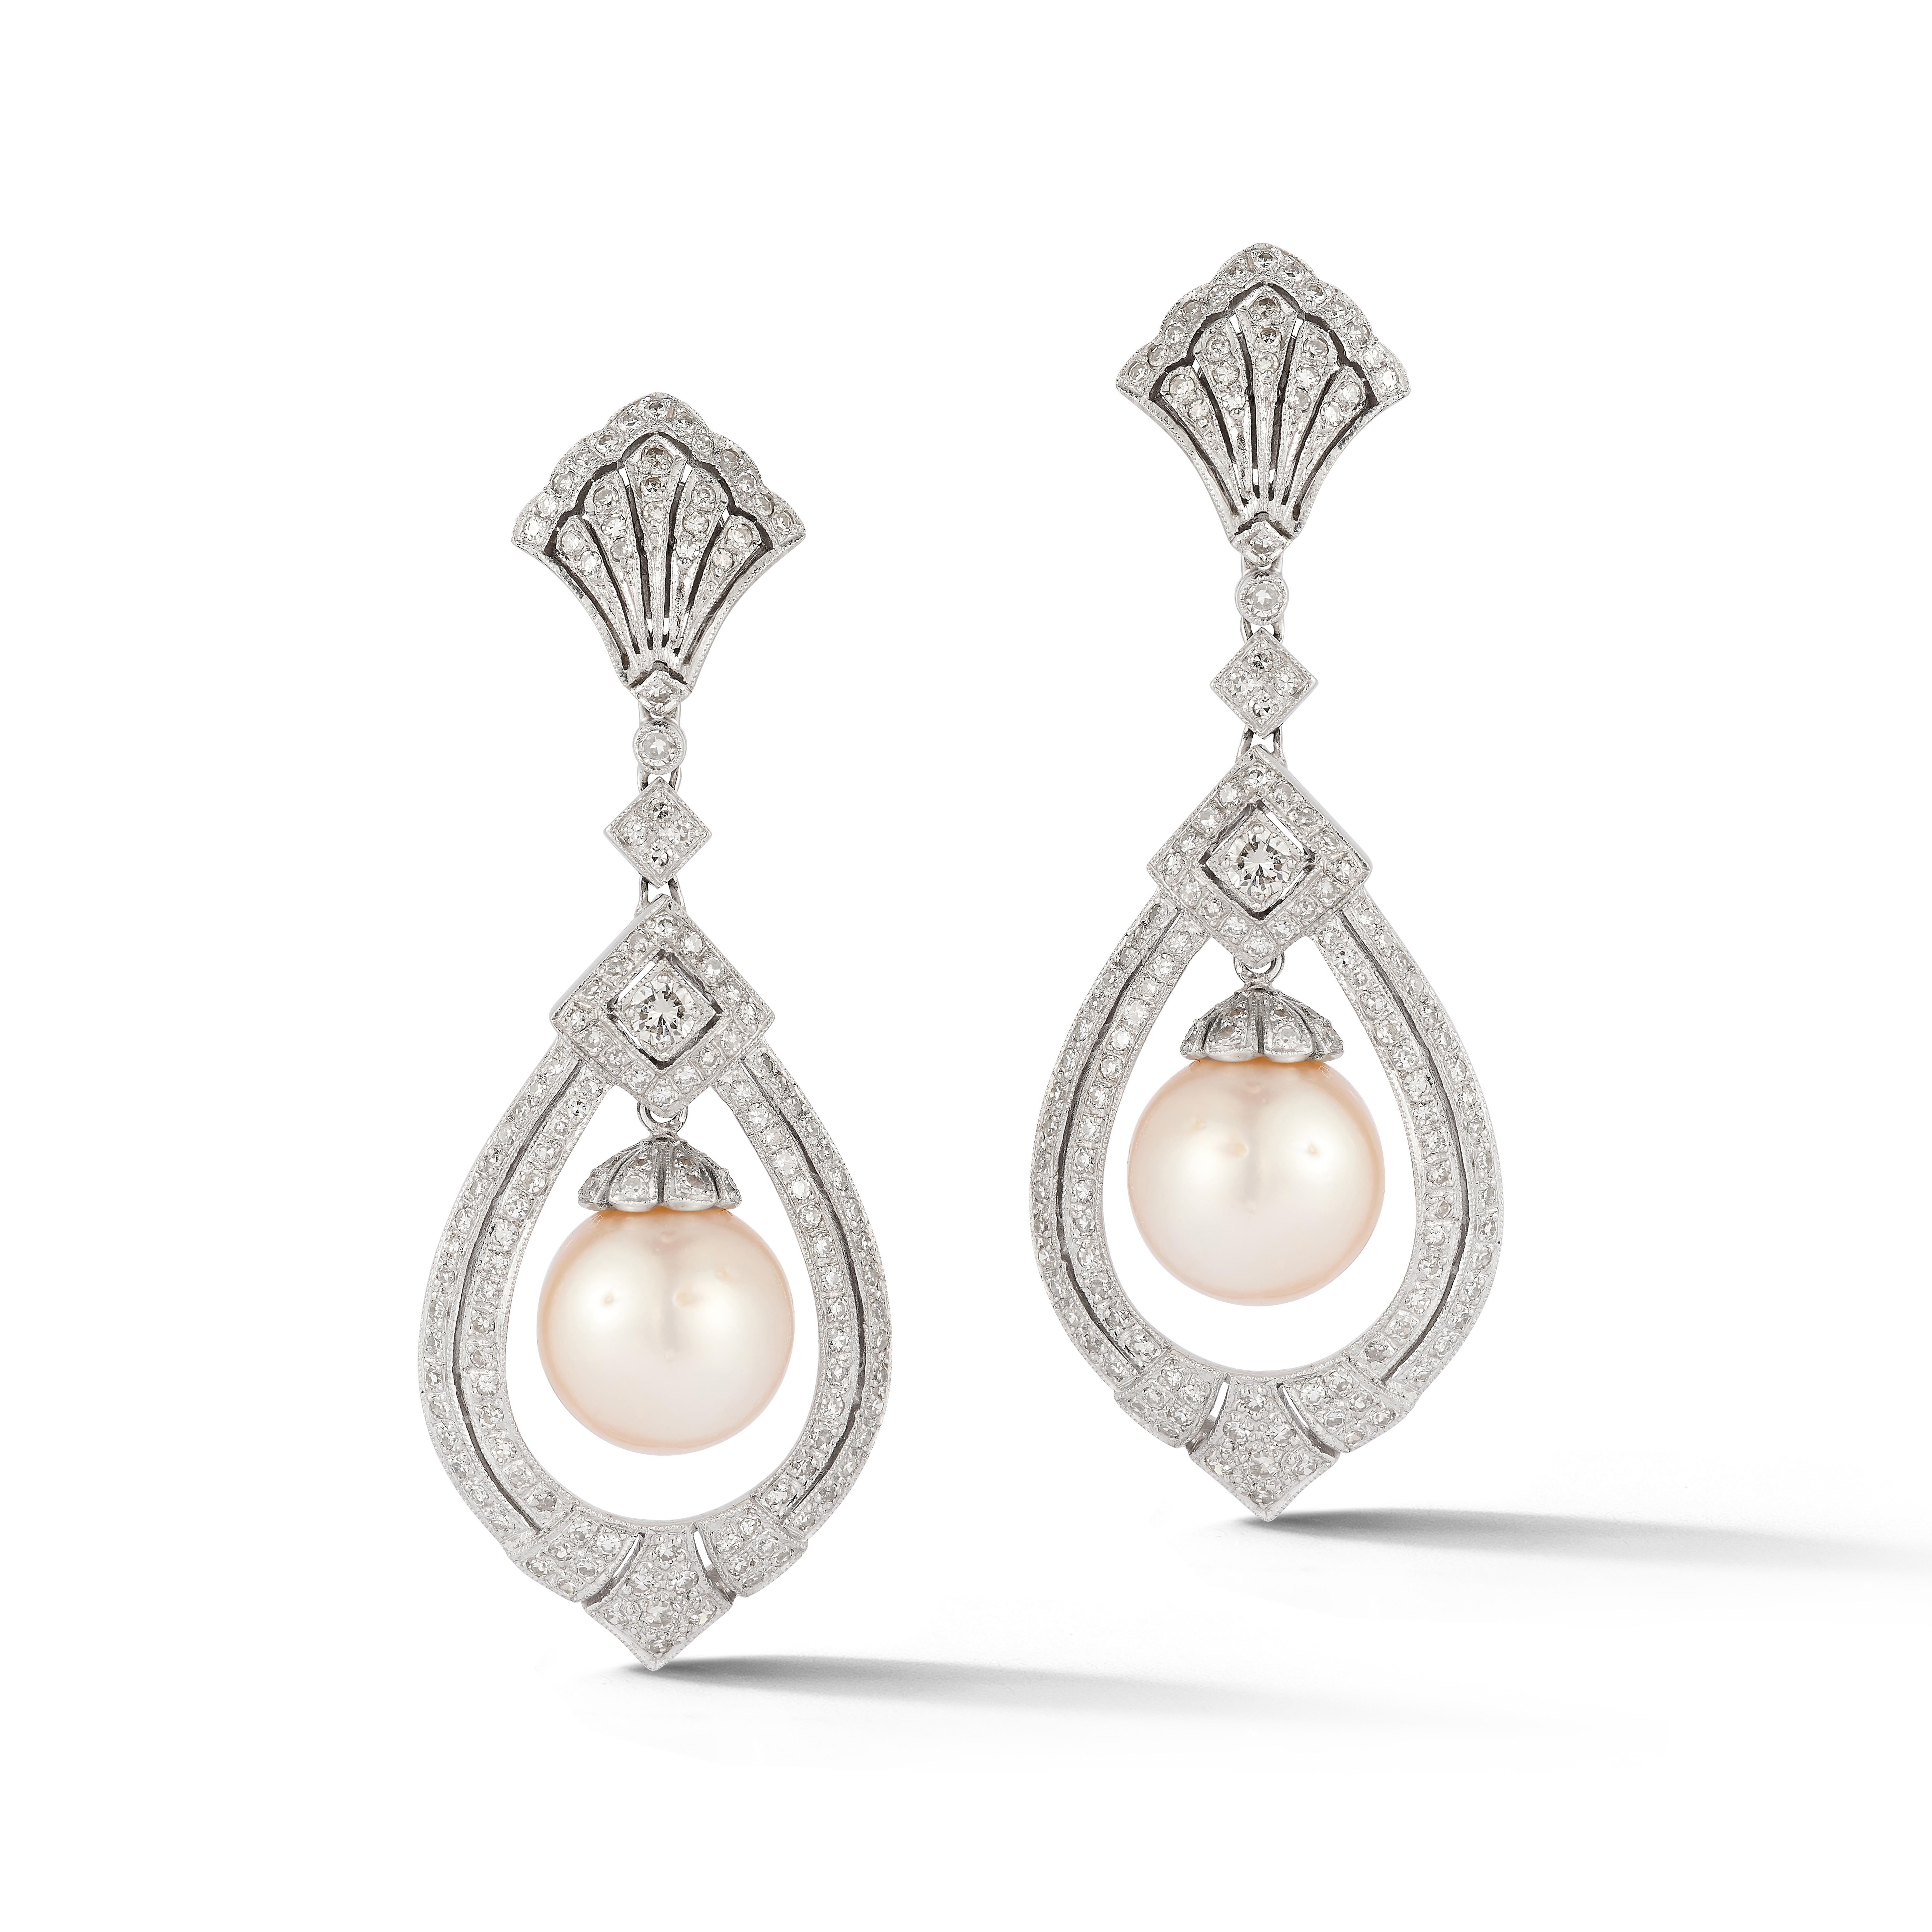 Pearl & Diamond Earrings

A pair of 18 karat white gold earrings set with 2 south sea pearls framed by approximately 3.04 carats of diamonds

Length: 2